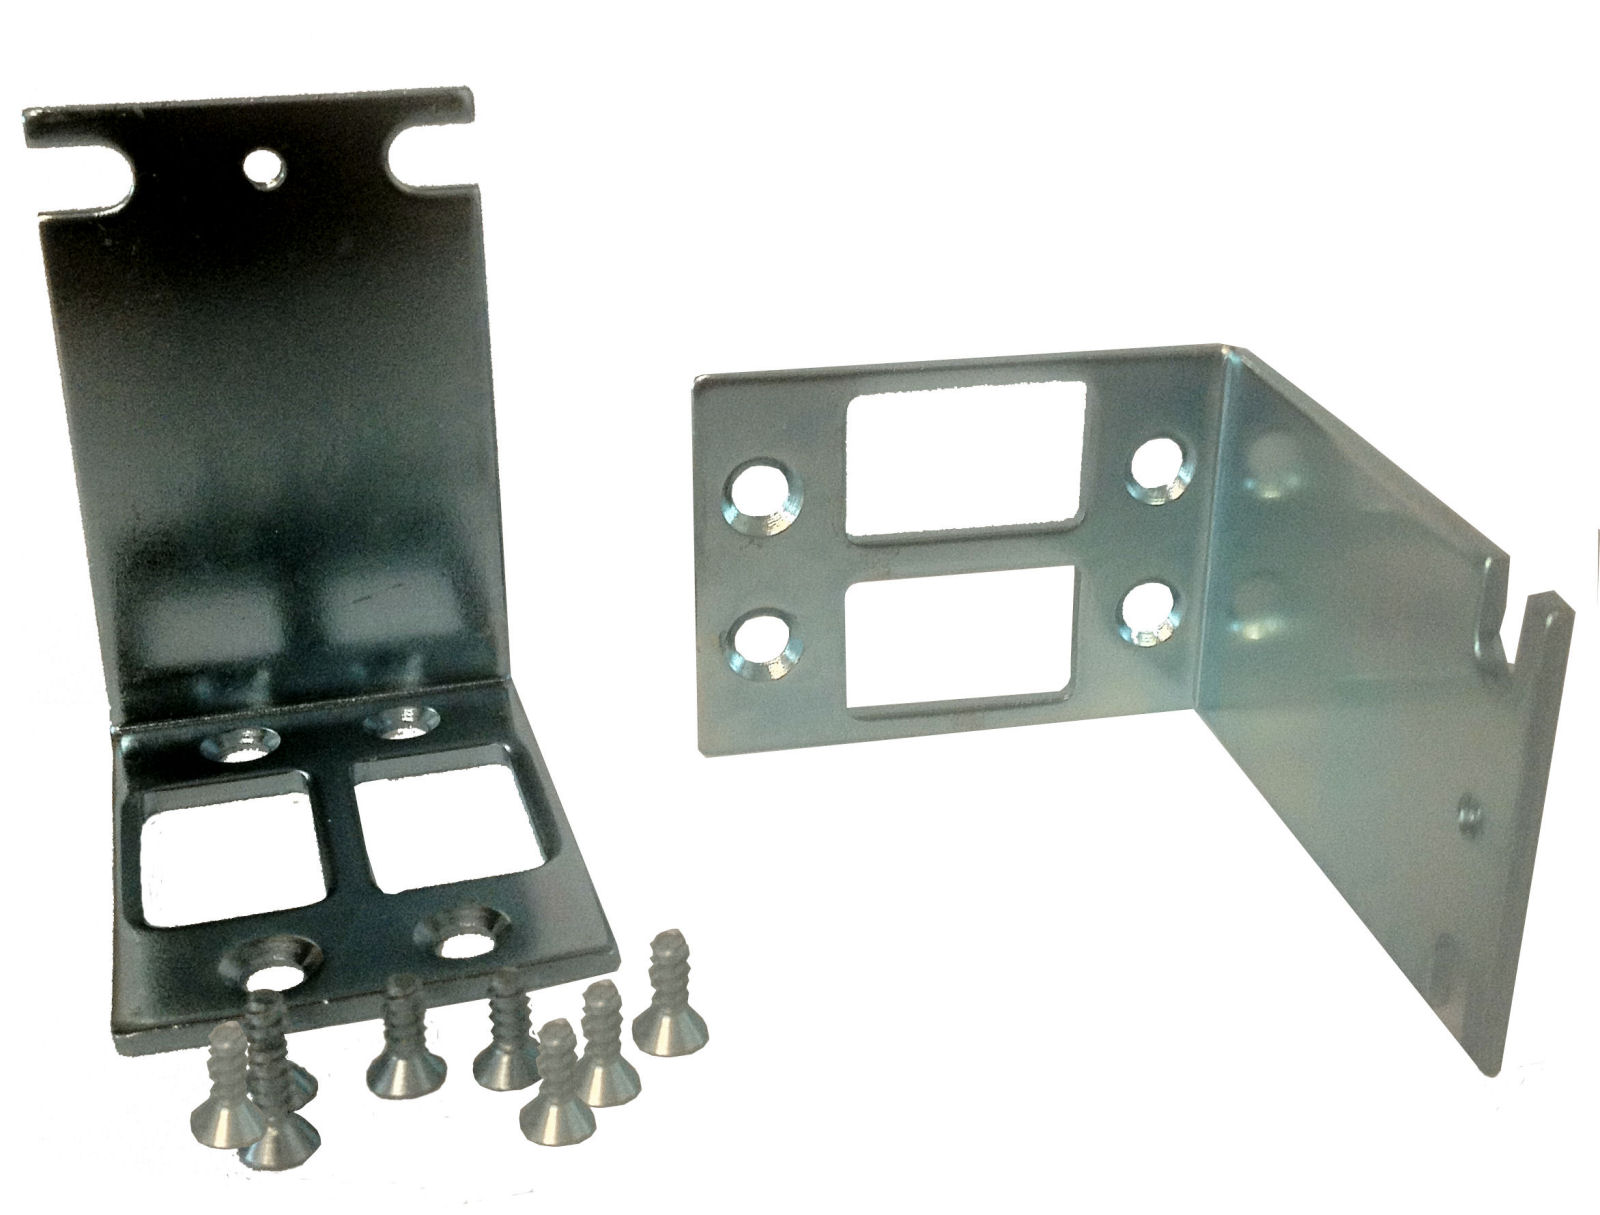 19" Rack Mount Kit for Cisco 1841 - Click Image to Close